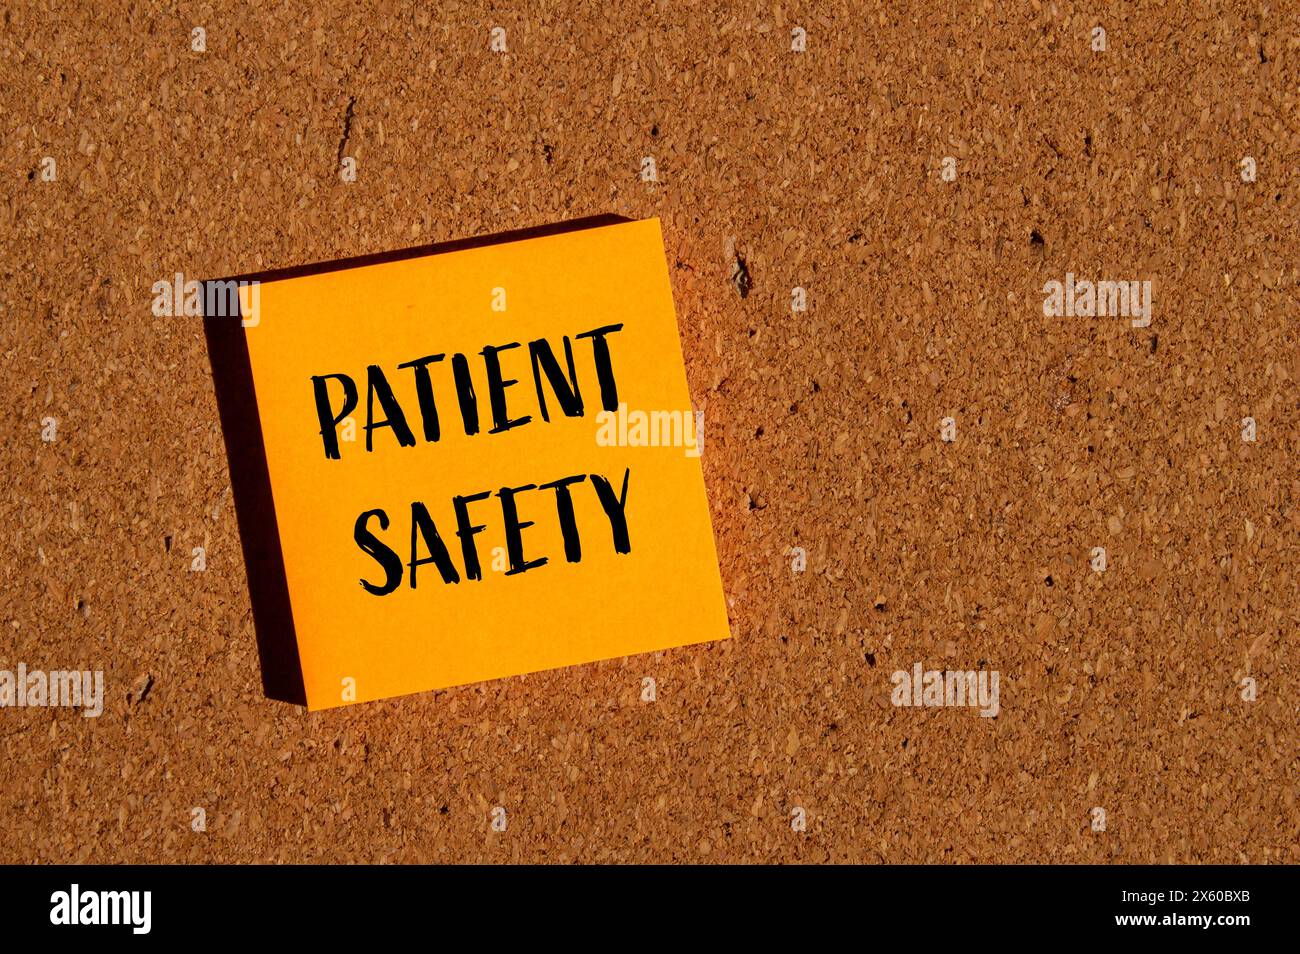 Patient safety words written on orange paper sticker with brown background. Conceptual patient safety symbol. Copy space. Stock Photo